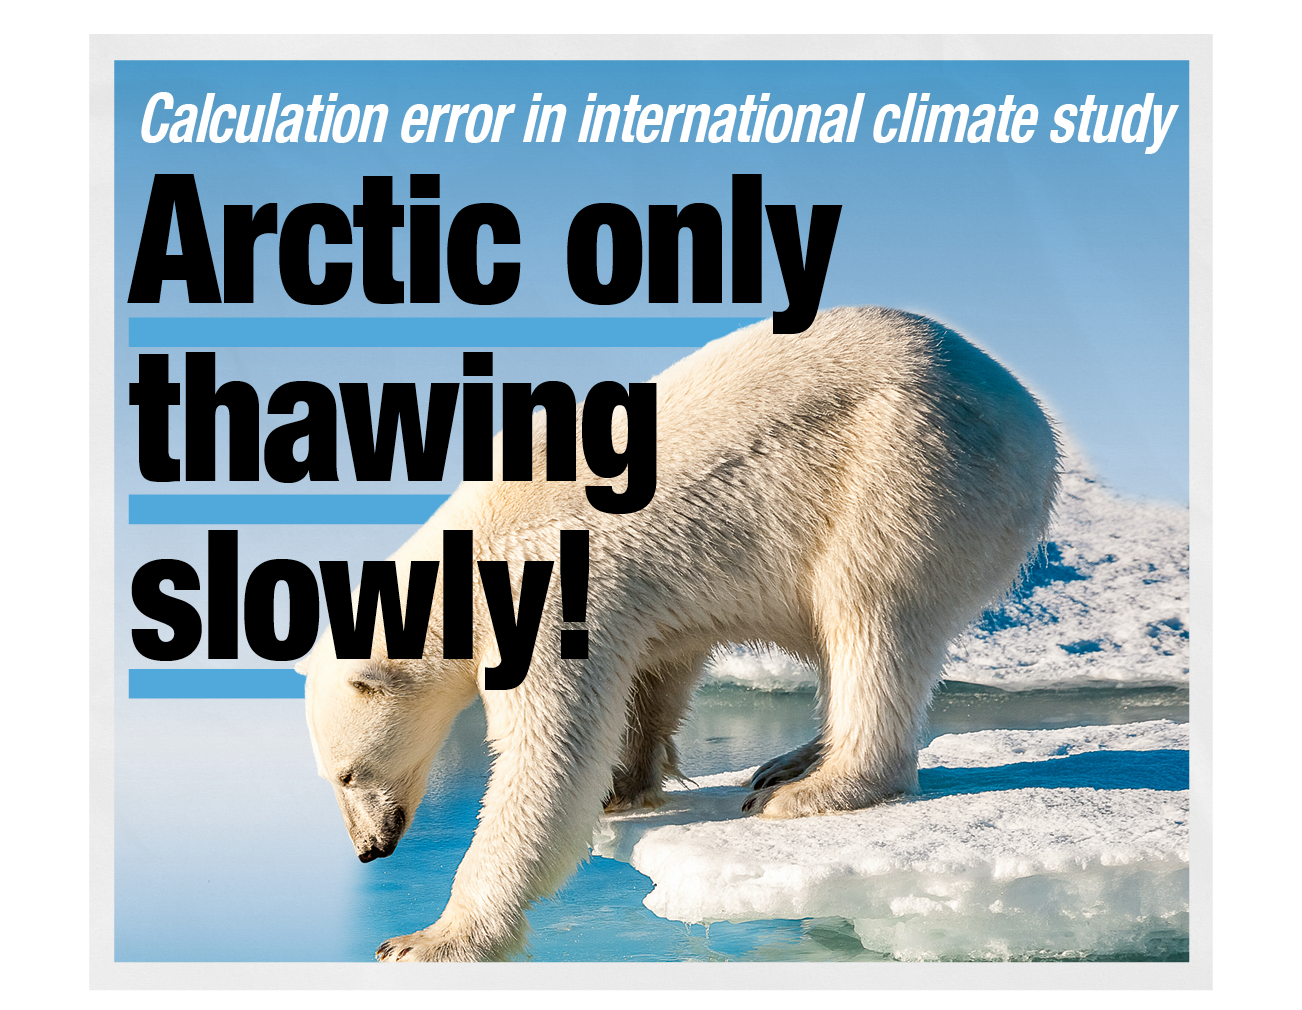 Calculation error in international climate study: Arctic only thawing slowly!